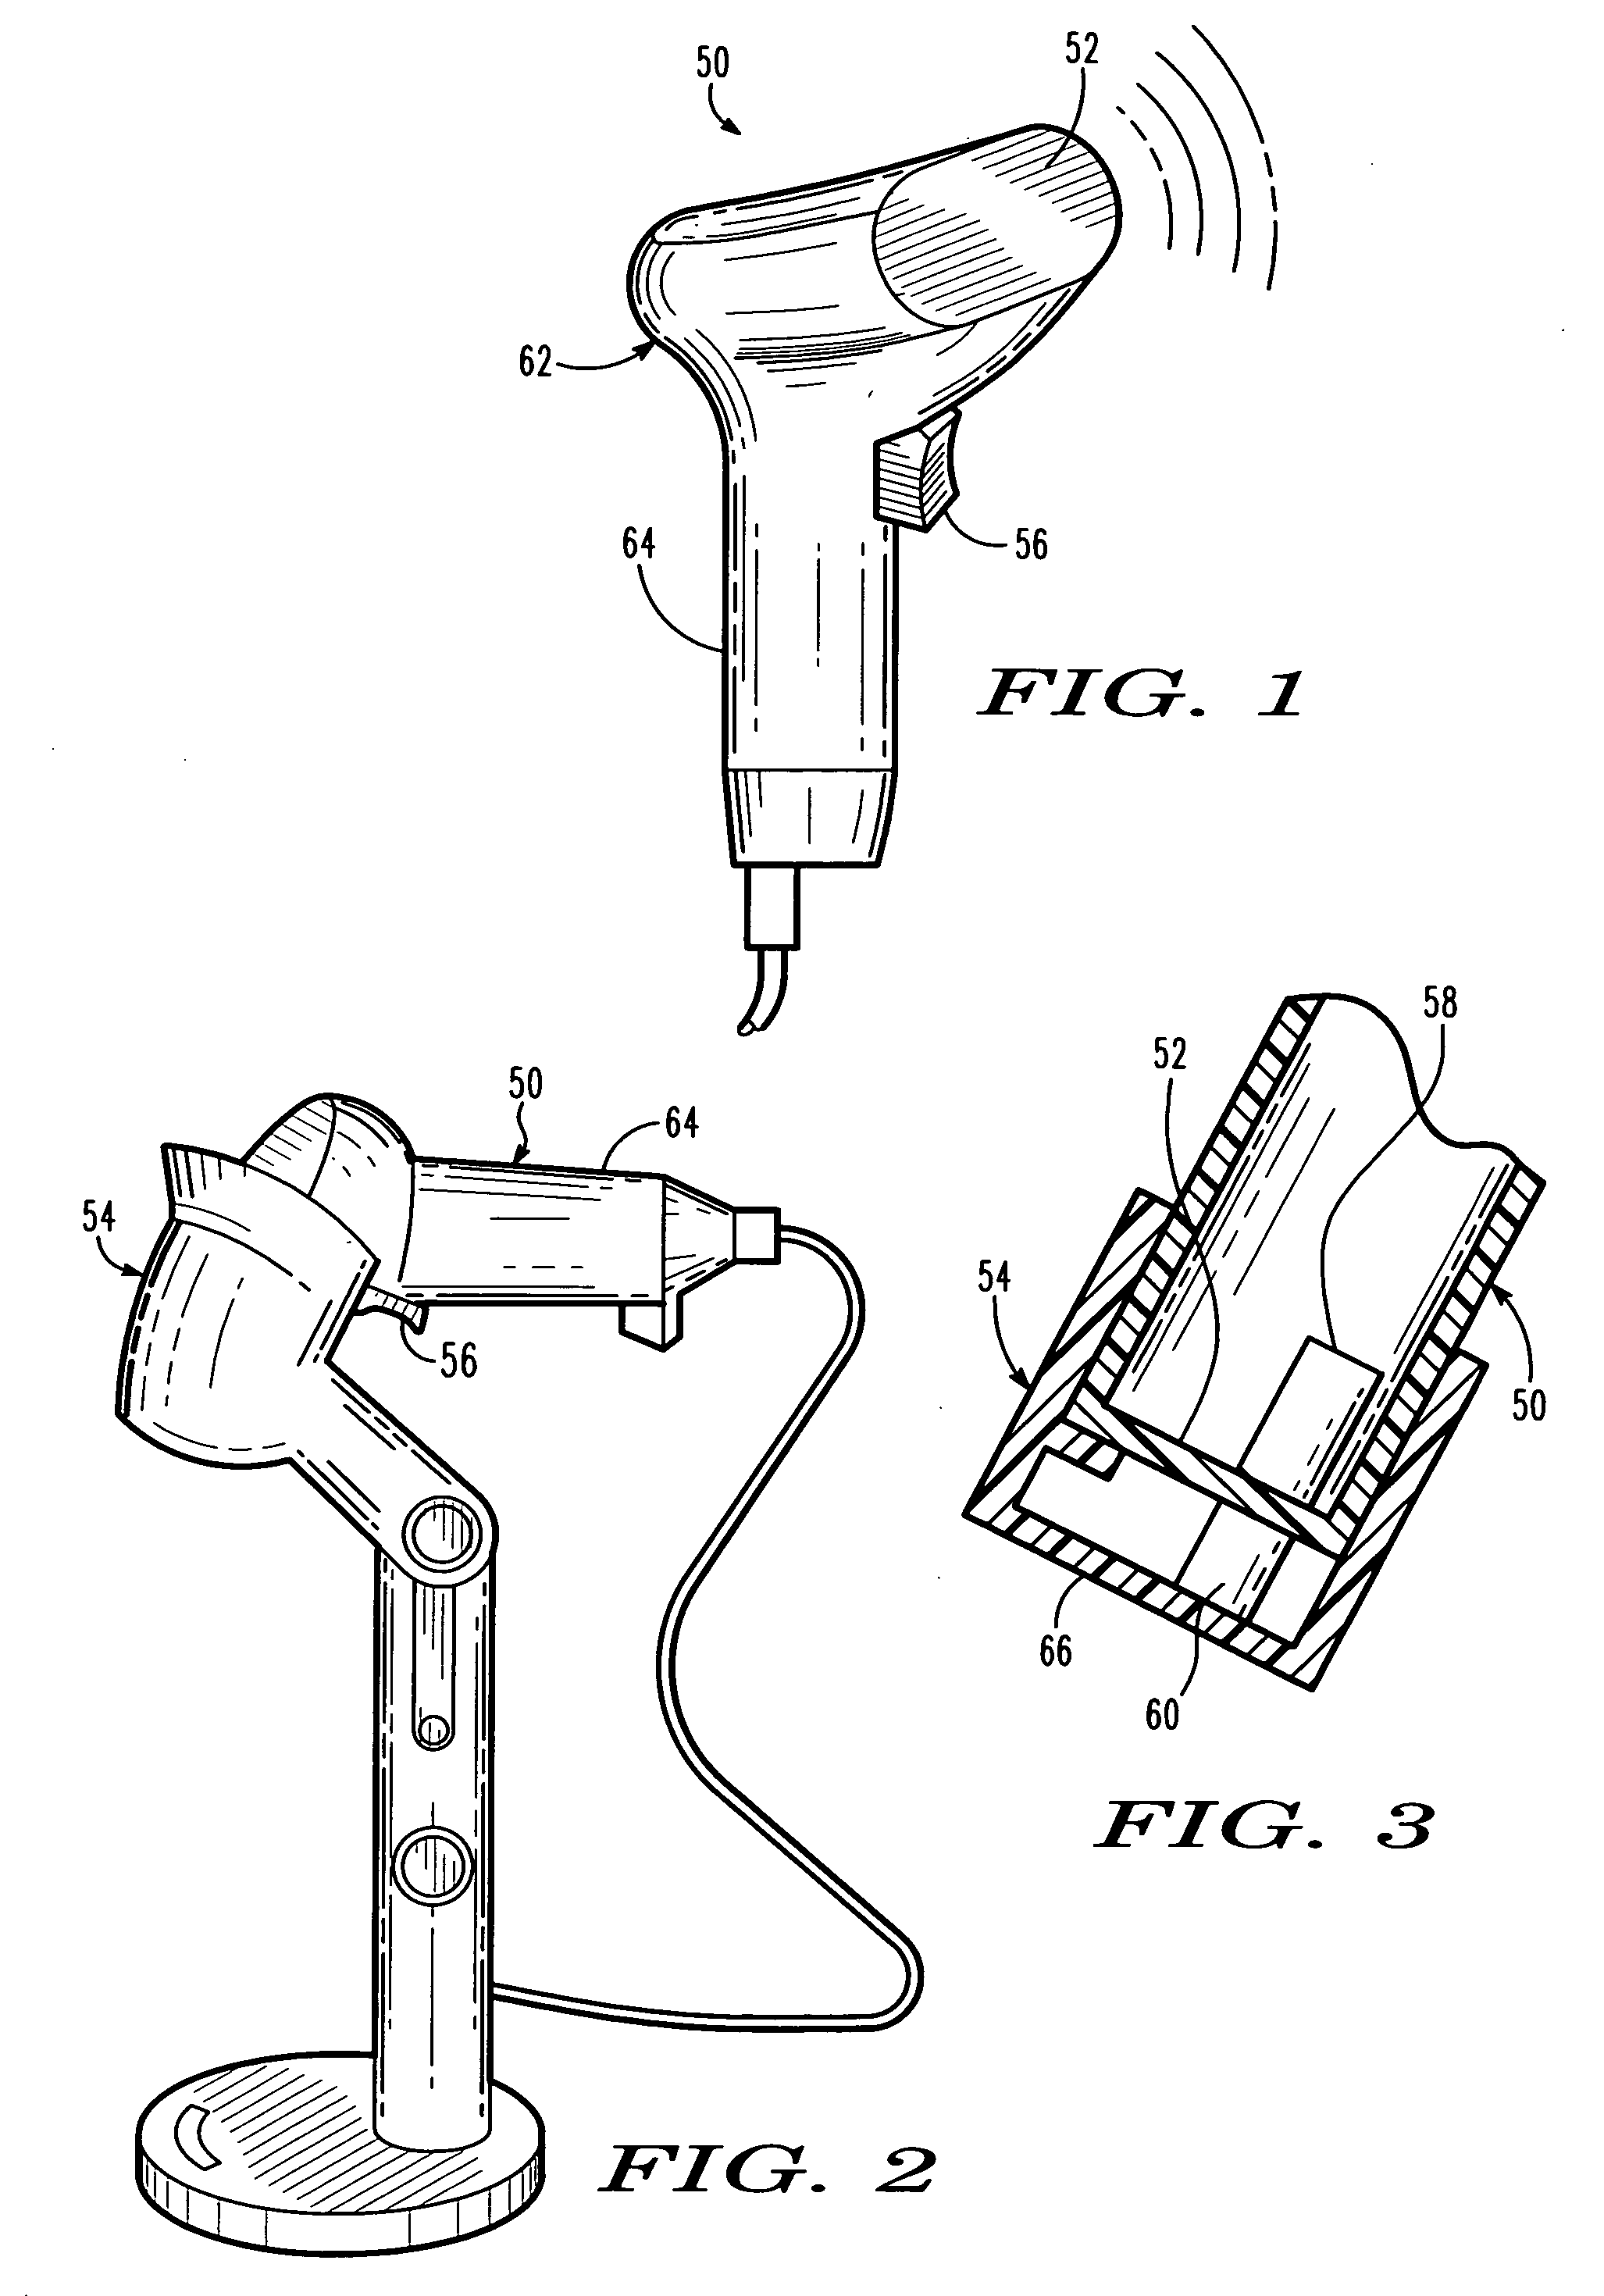 Radio frequency identification reader with variable range